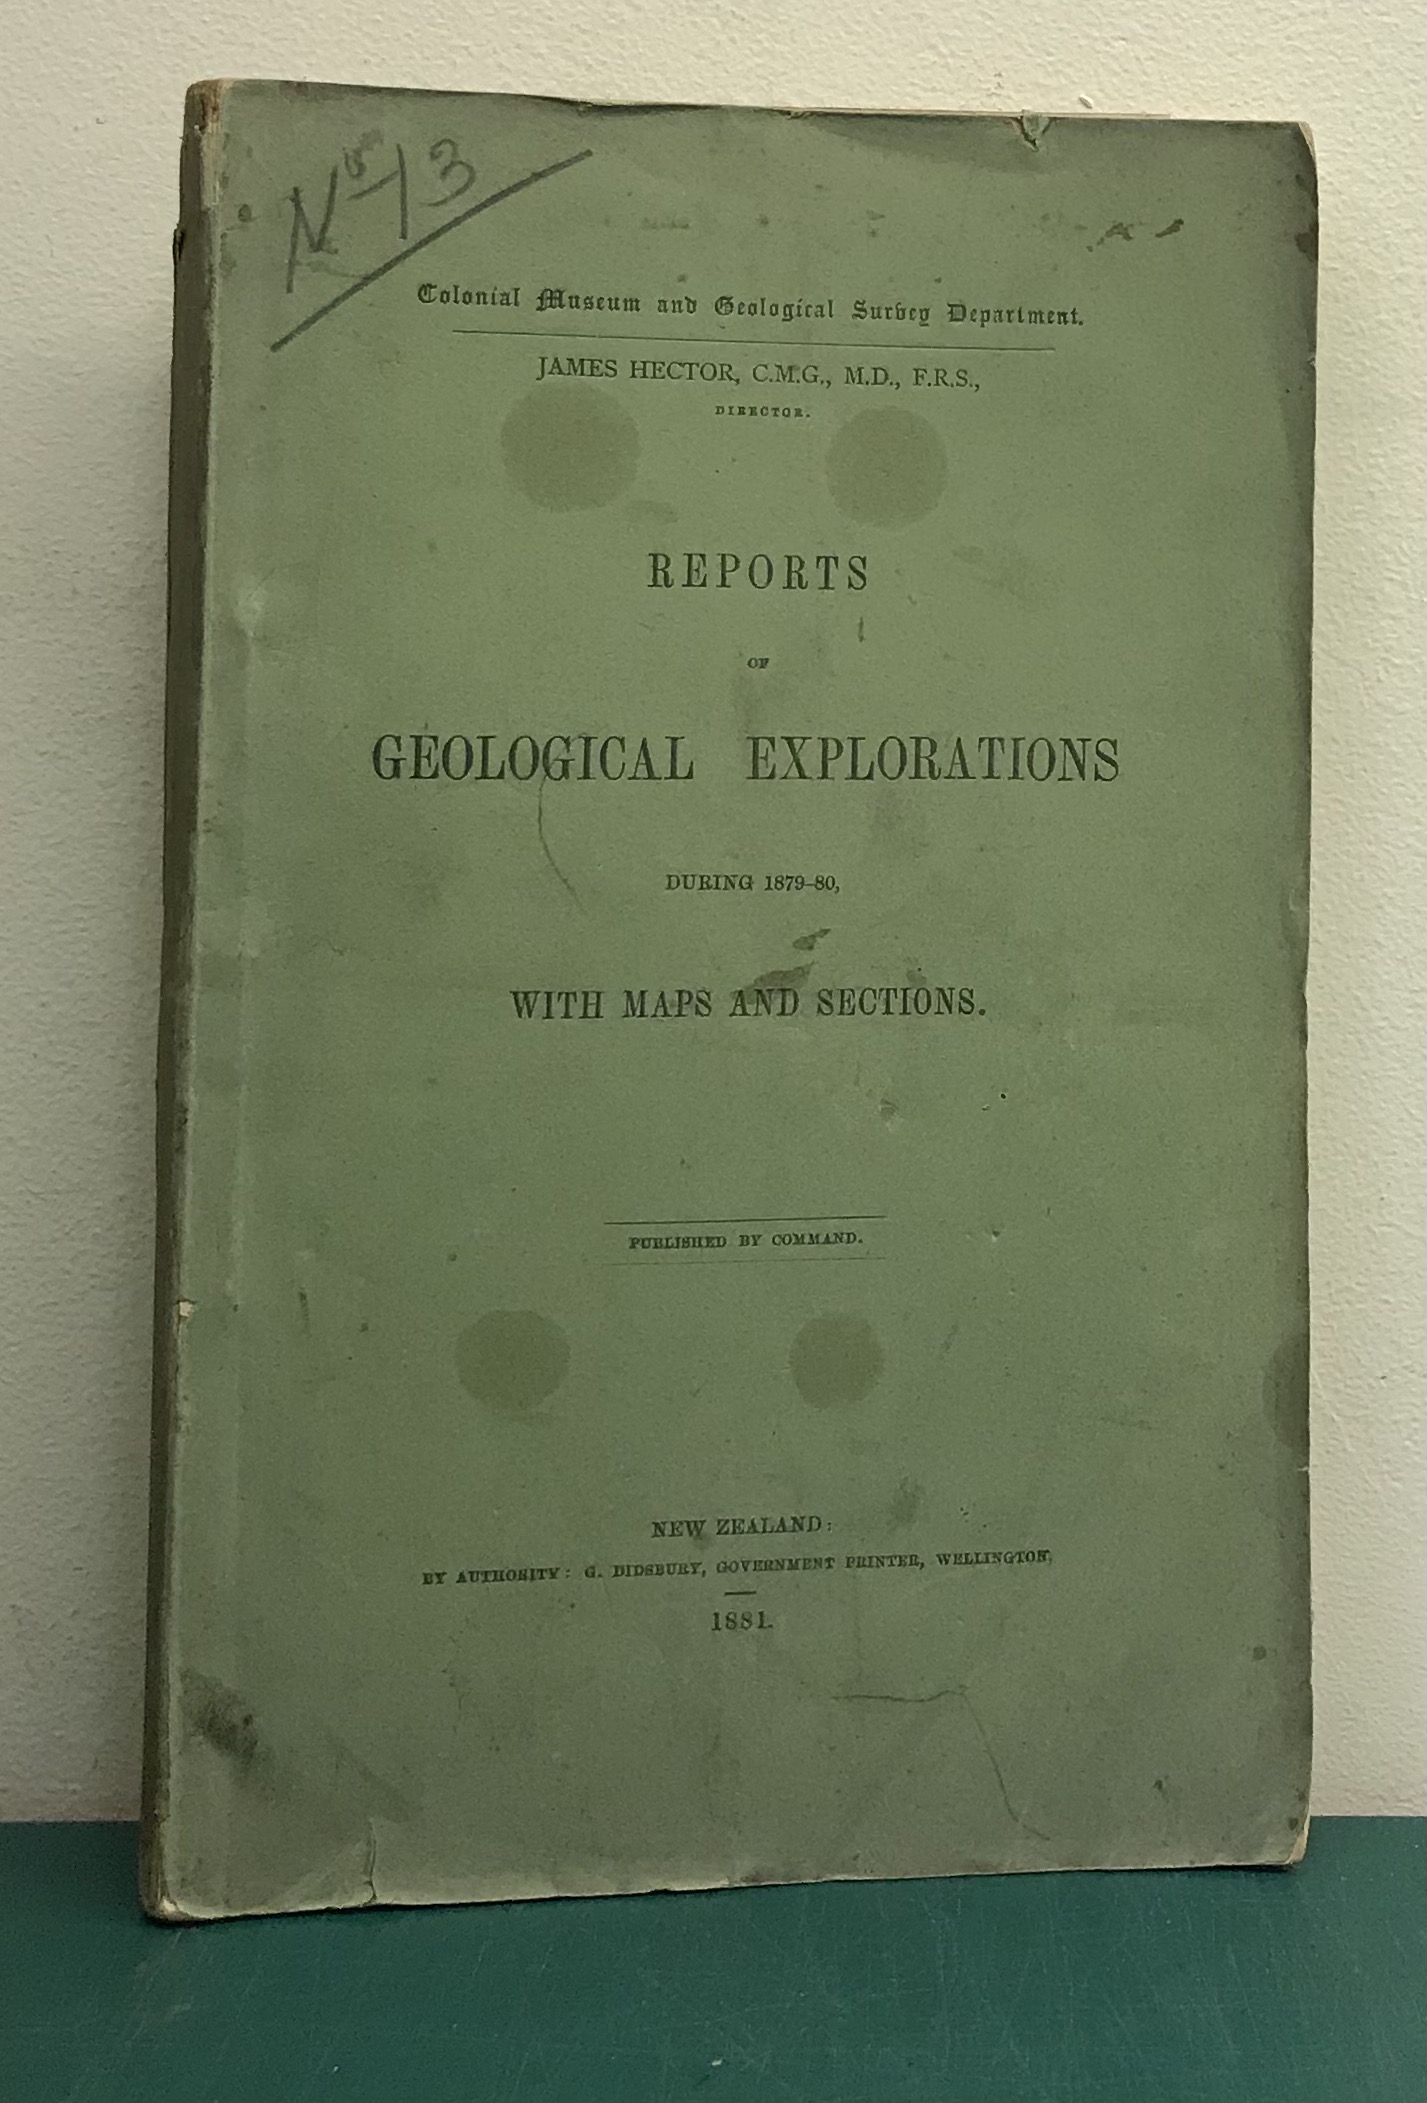 Reports of Geological Explorations During 1879-1880 with Maps and Sections